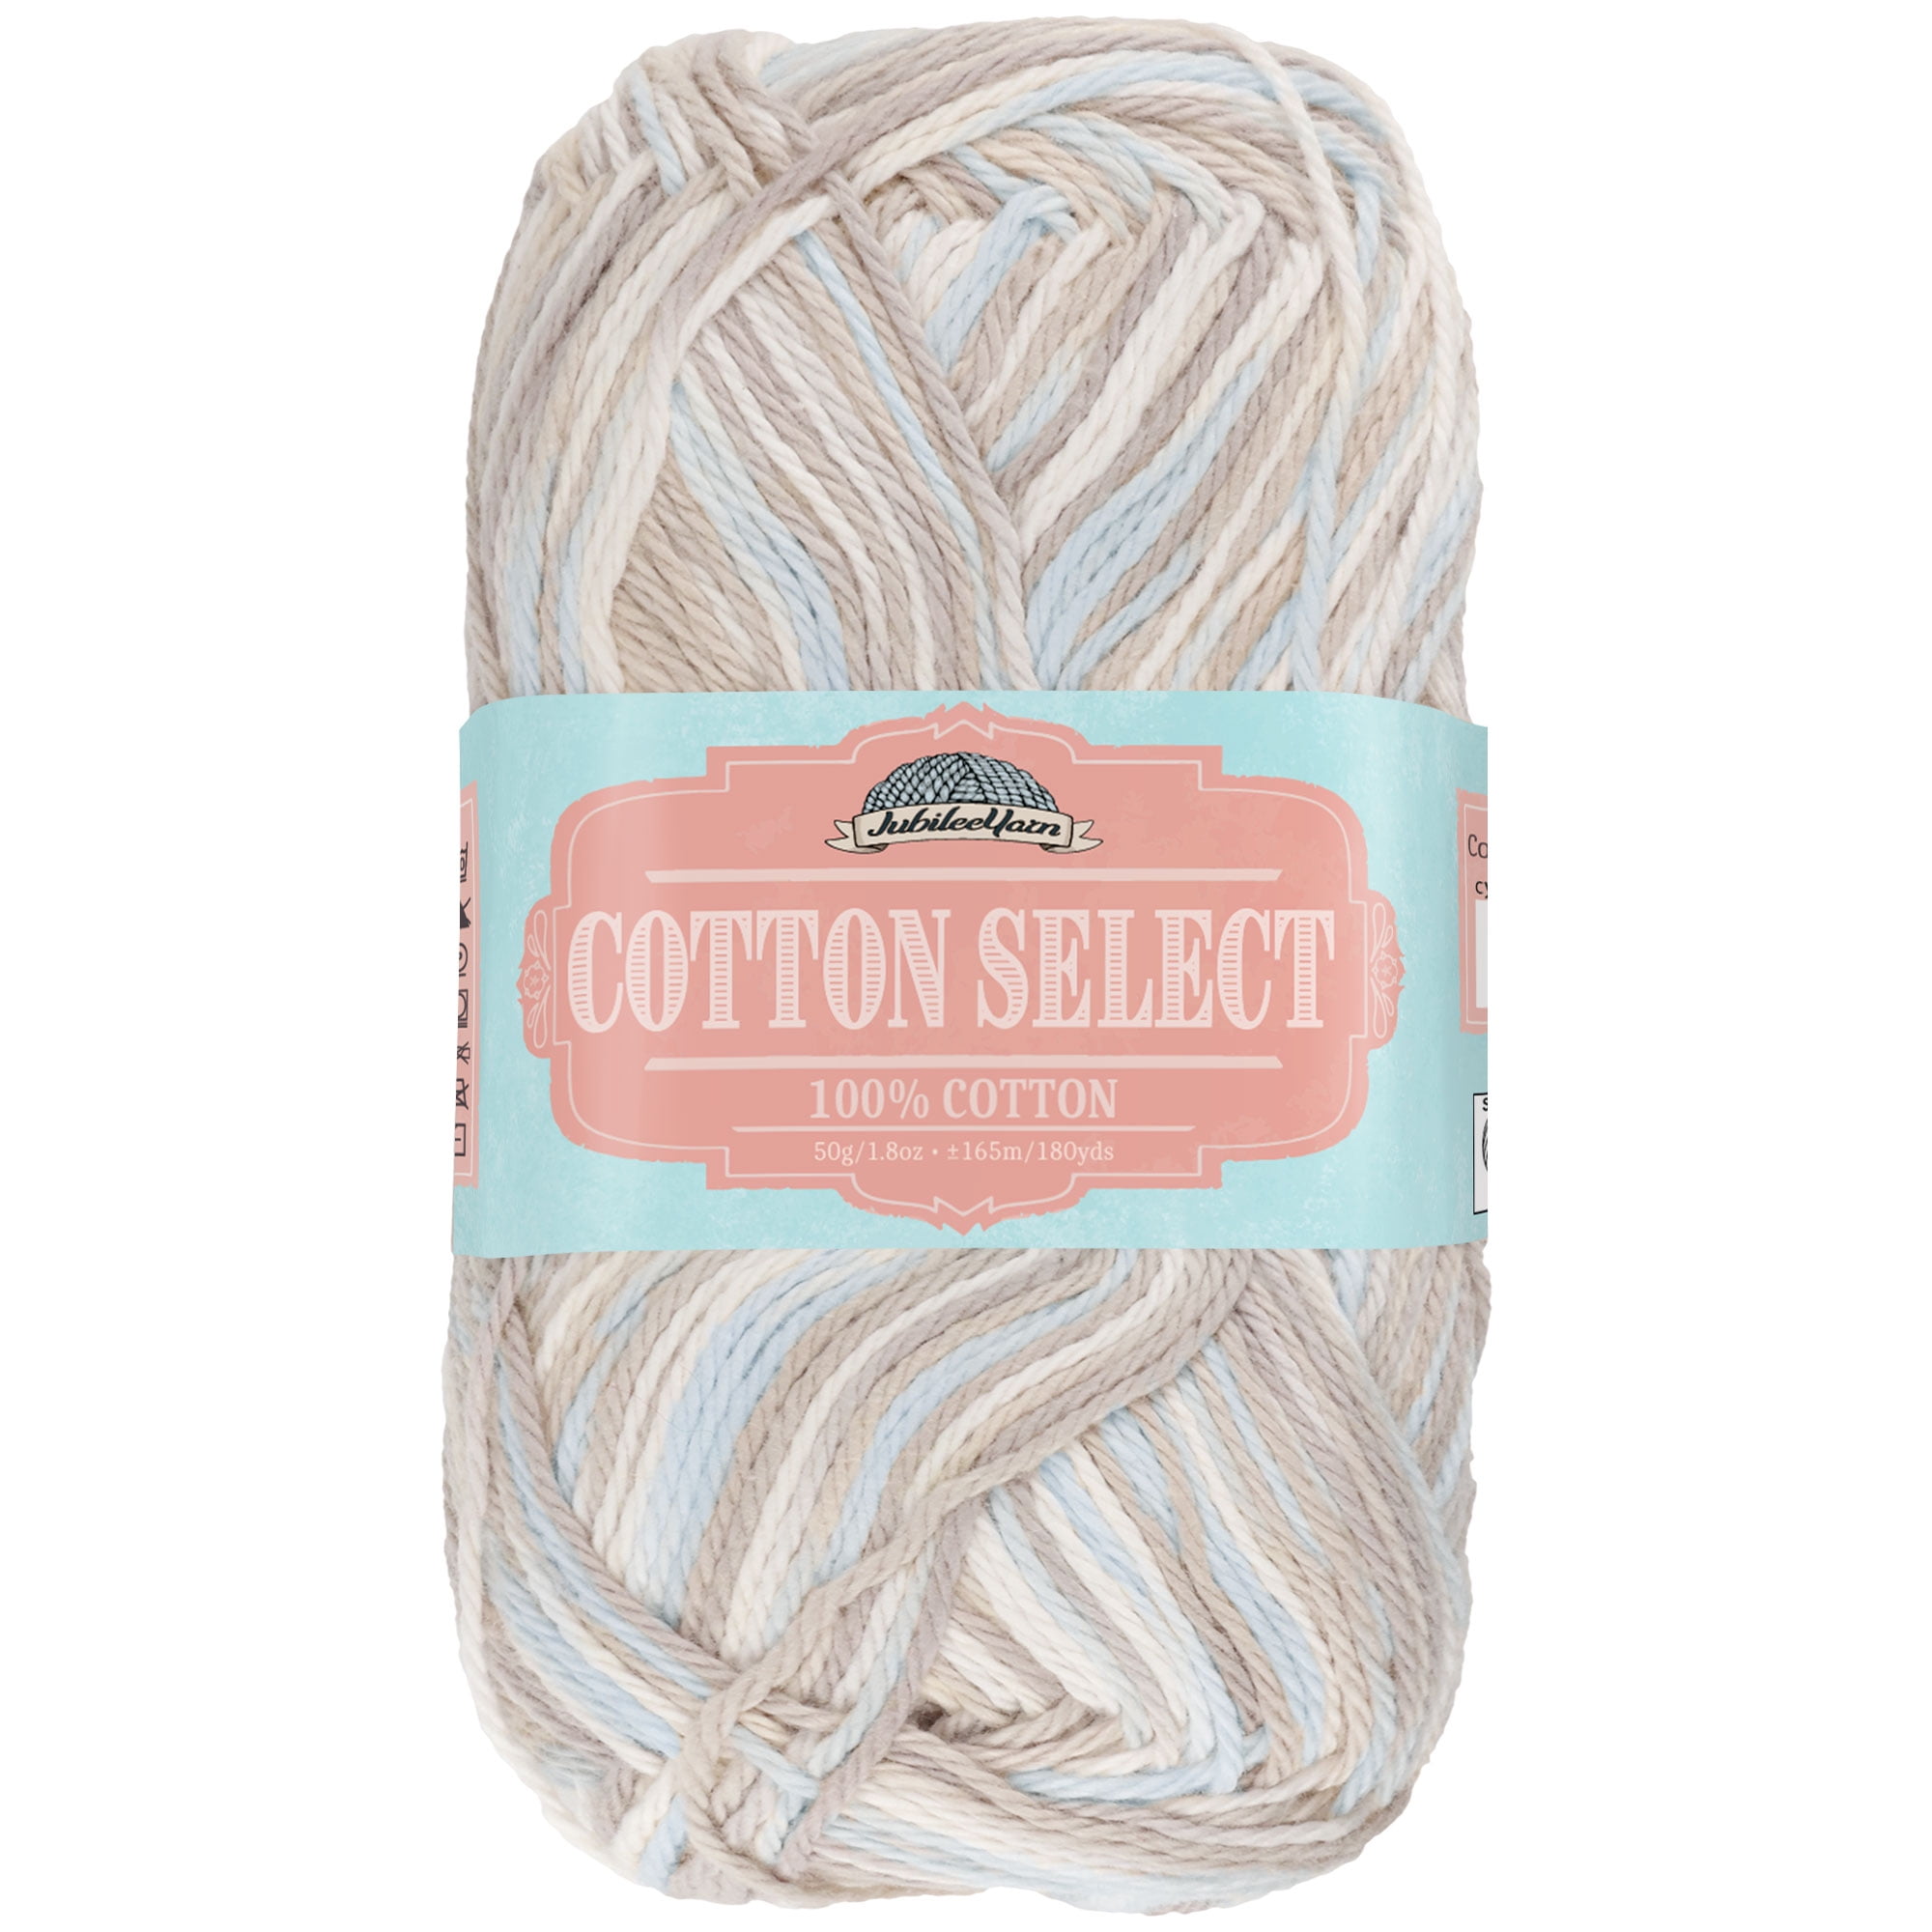 SALE** on select Yarns and Notions